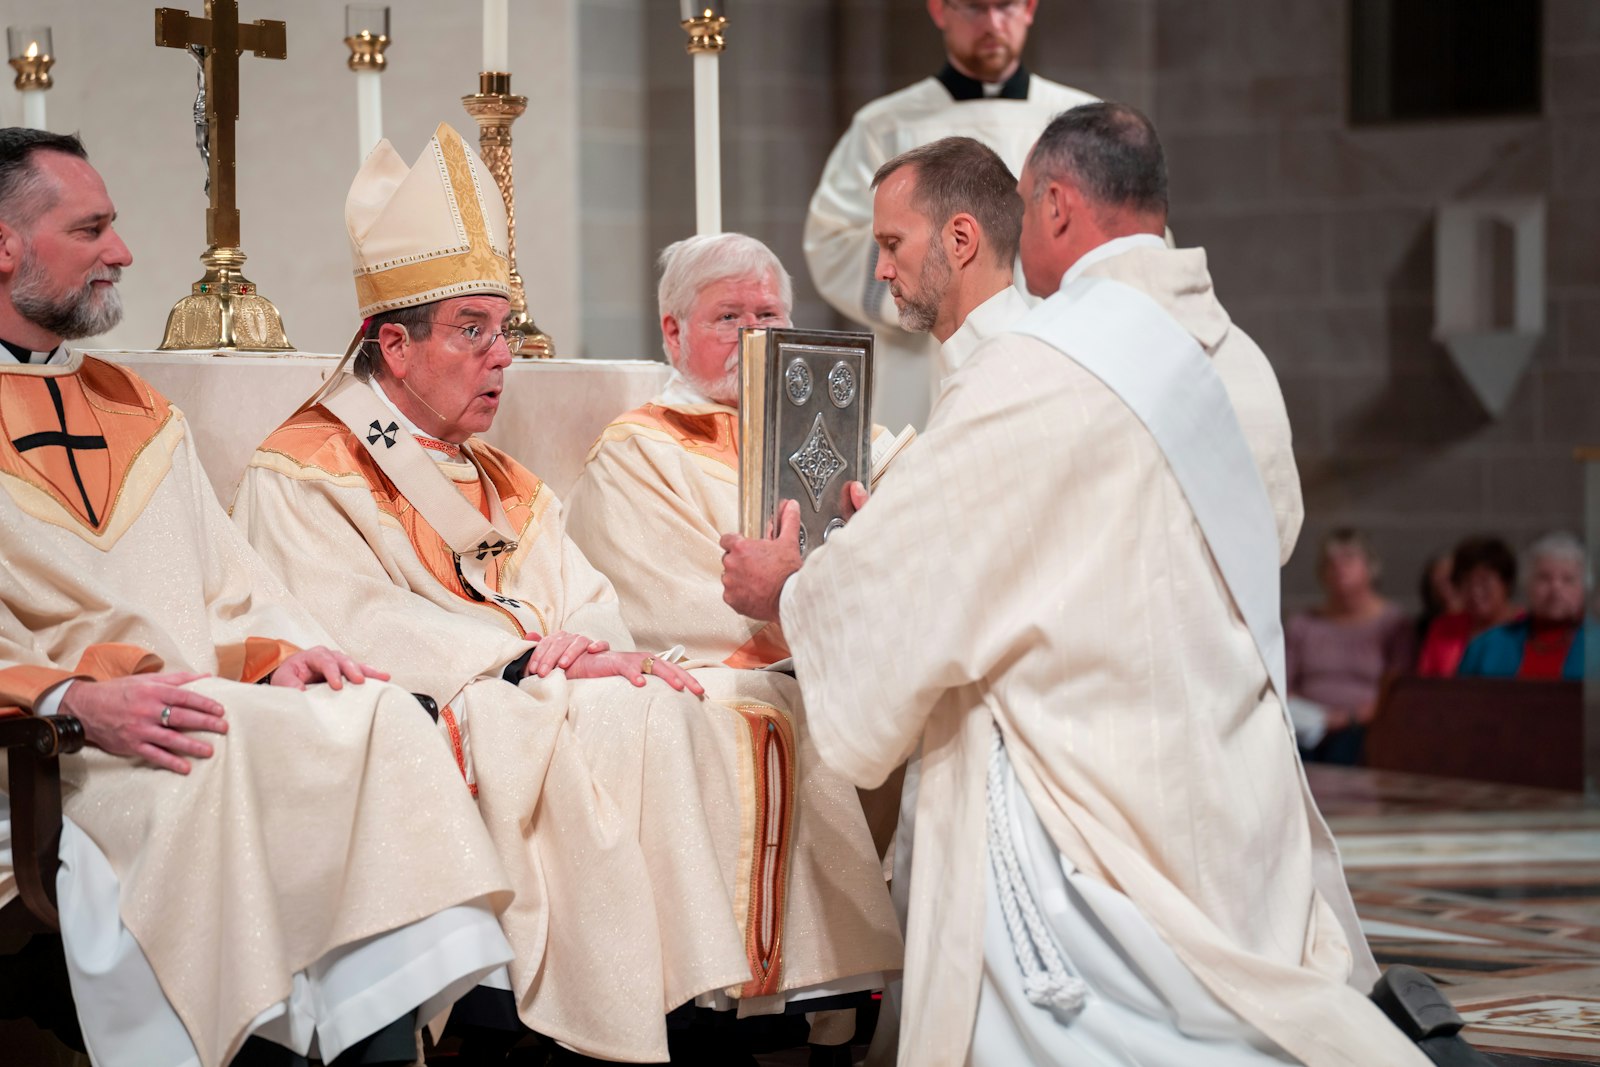 Deacon Alan Pionk receives the book of the Gospels from Archbishop Allen H. Vigneron of Detroit during the Ordination of Deacons for the Archdiocese of Detroit on Oct. 1. Deacon Pionk's first assignment will be at St. Christopher Parish in Marysville.